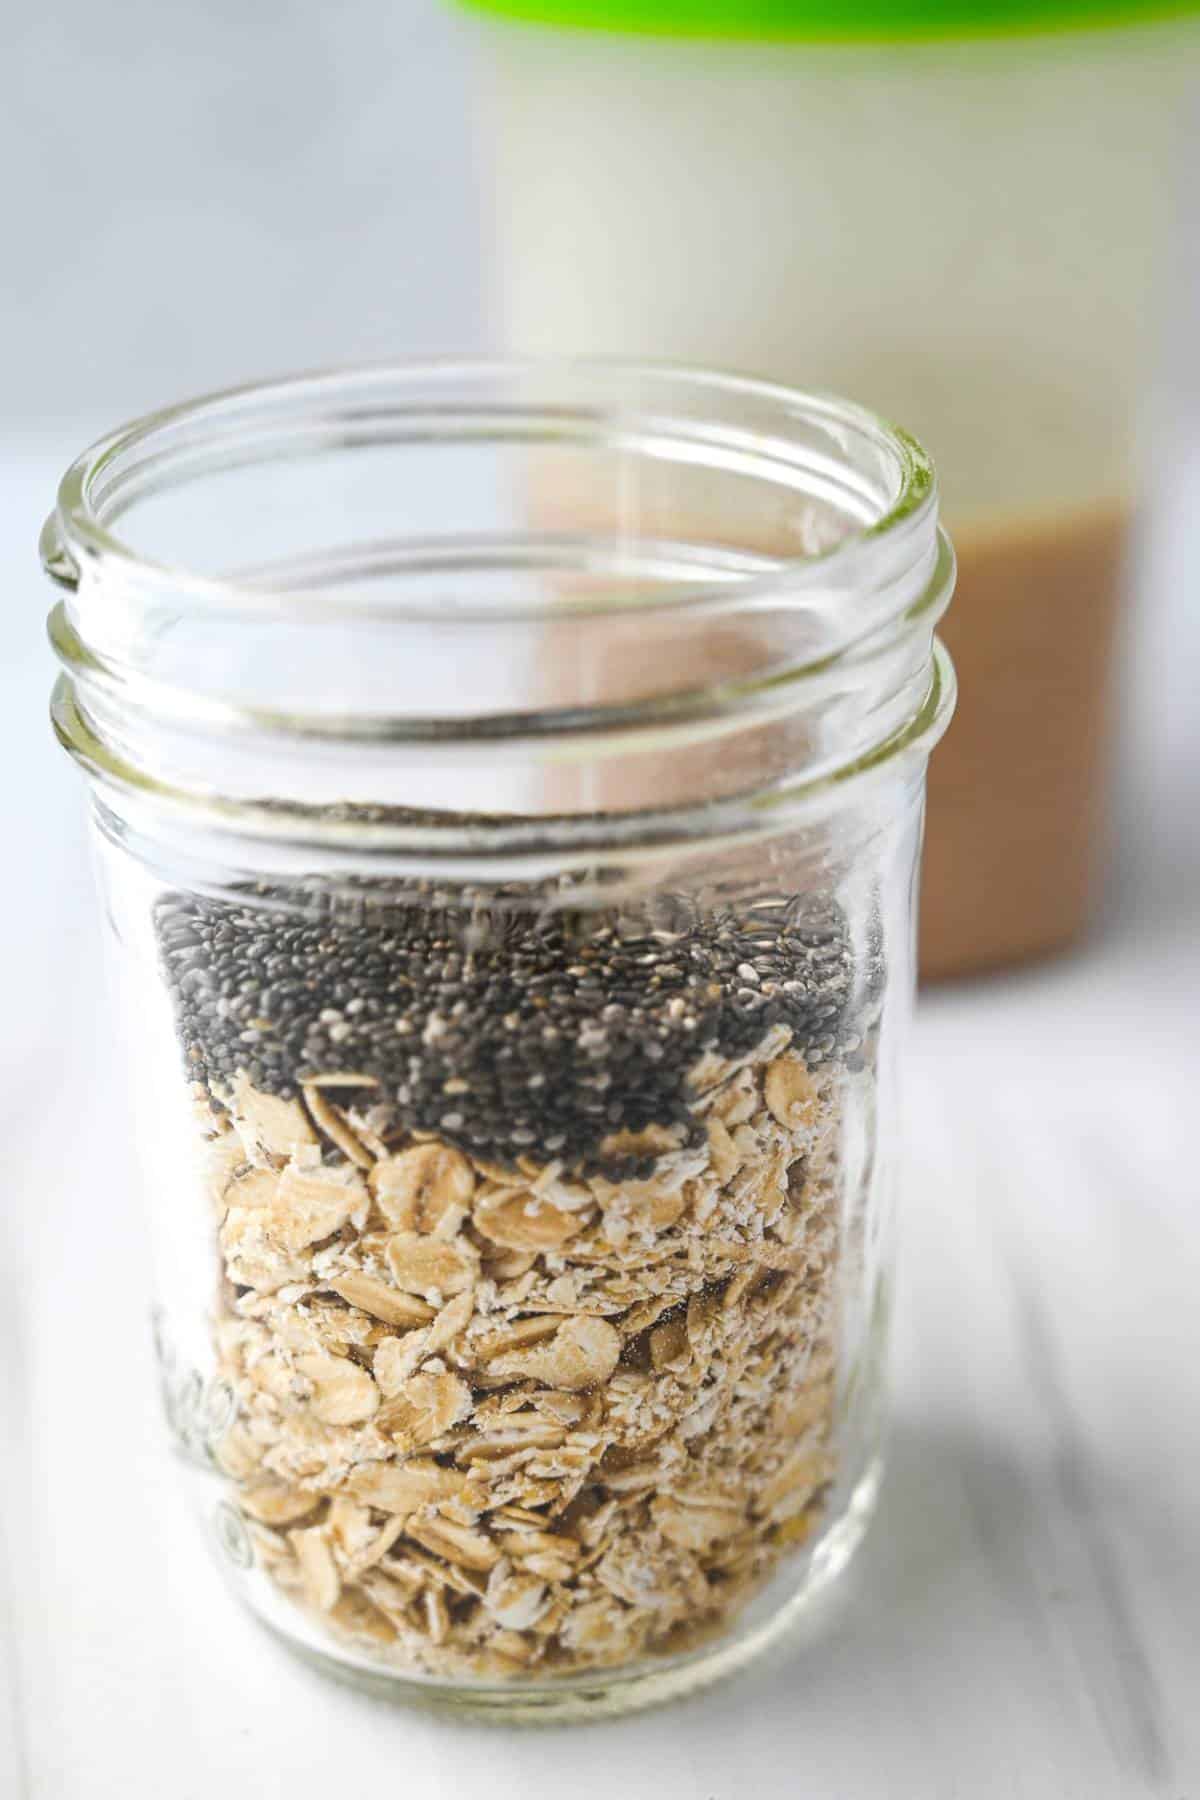 oats and chia seeds in a jar with shaker bottle of milk mixture behind it